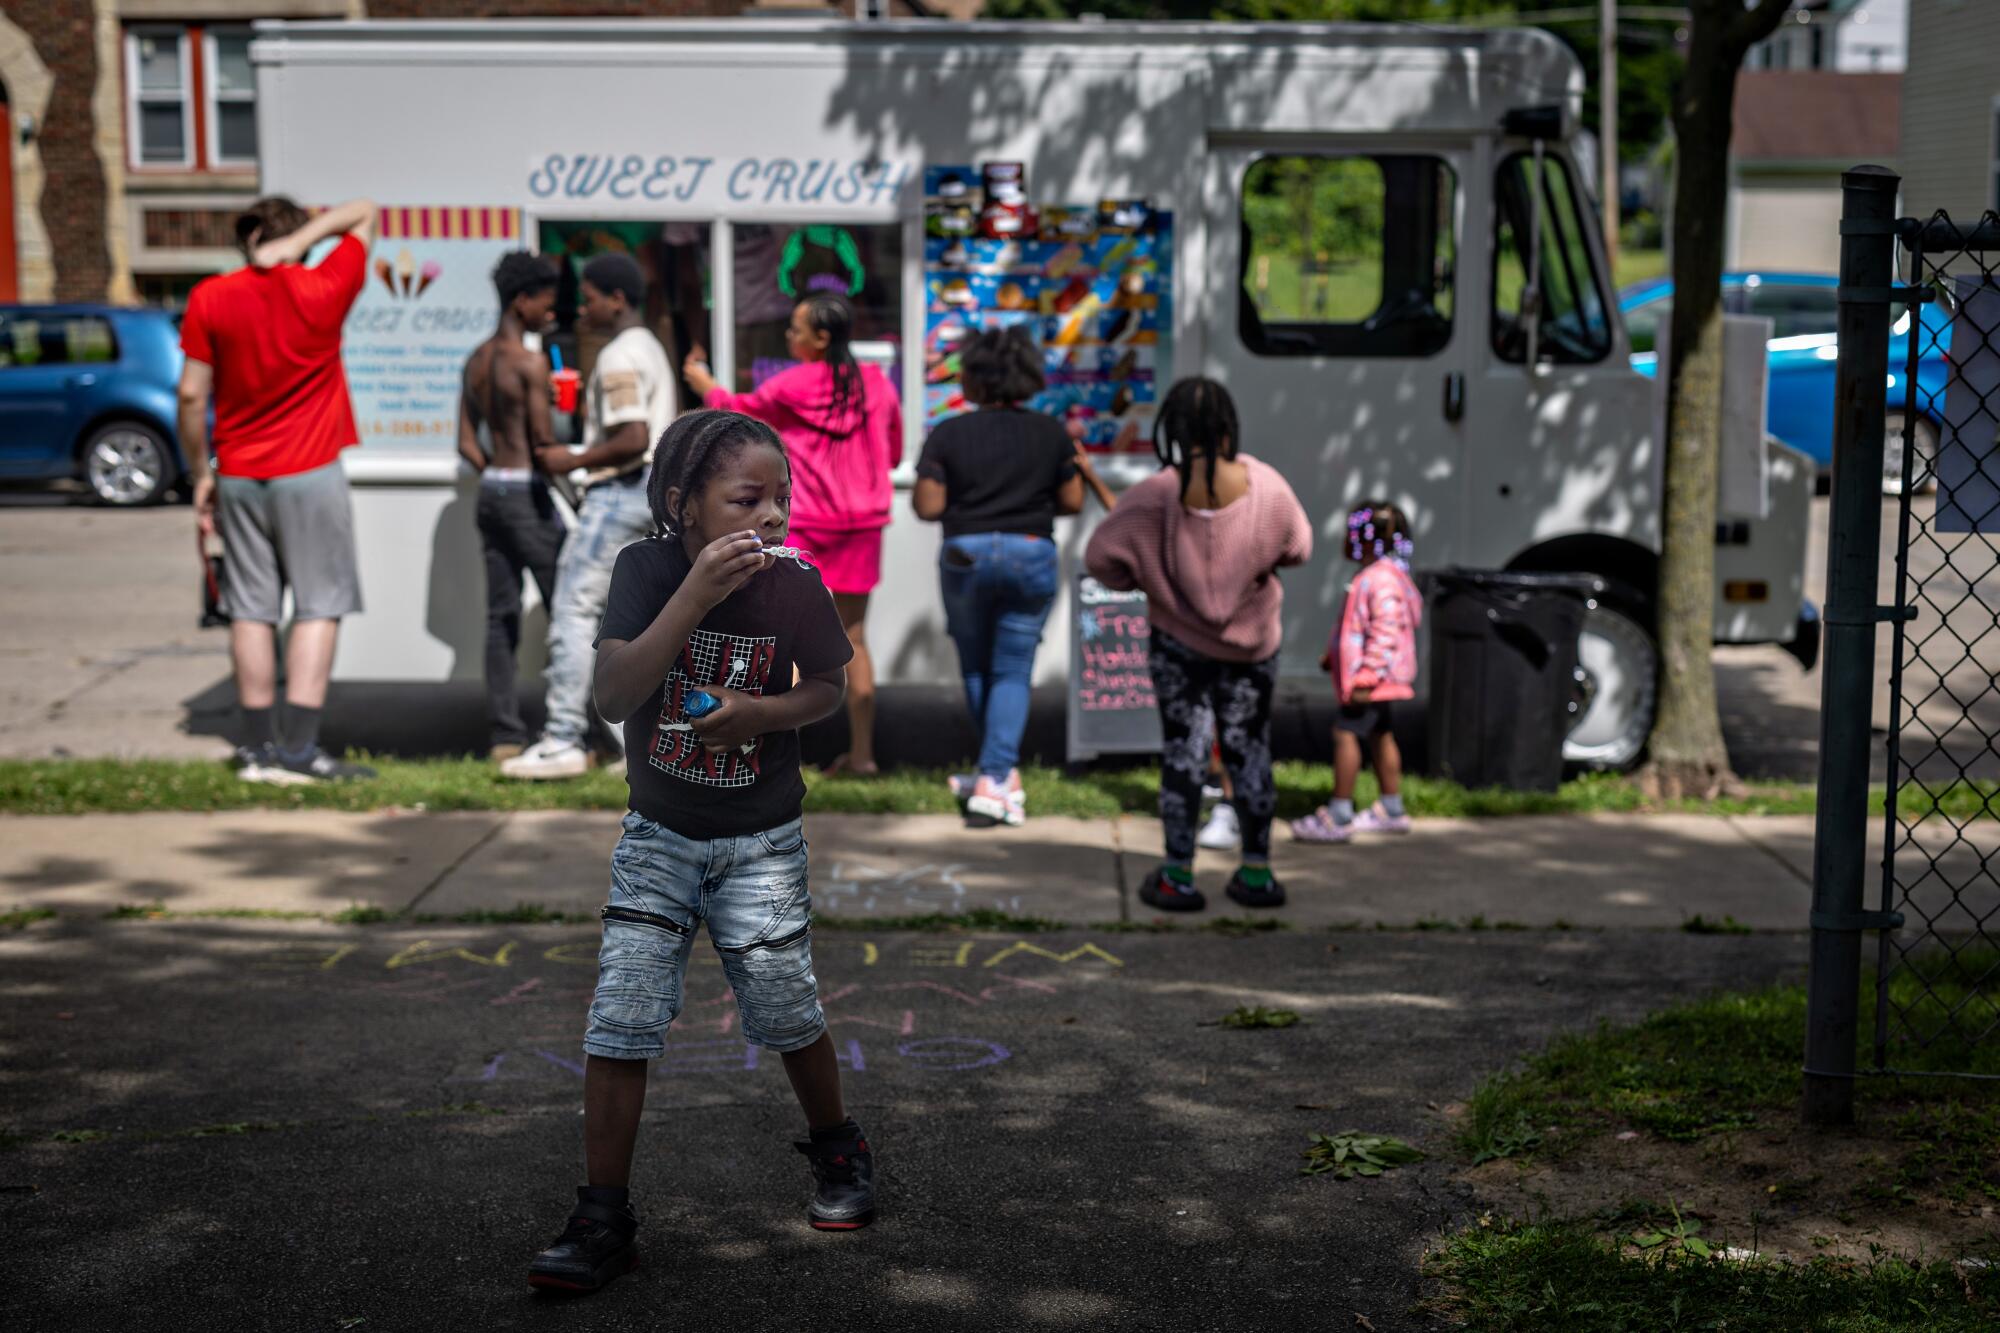 Kids gather for free ice cream at the Milwaukee Childcare Collective event.